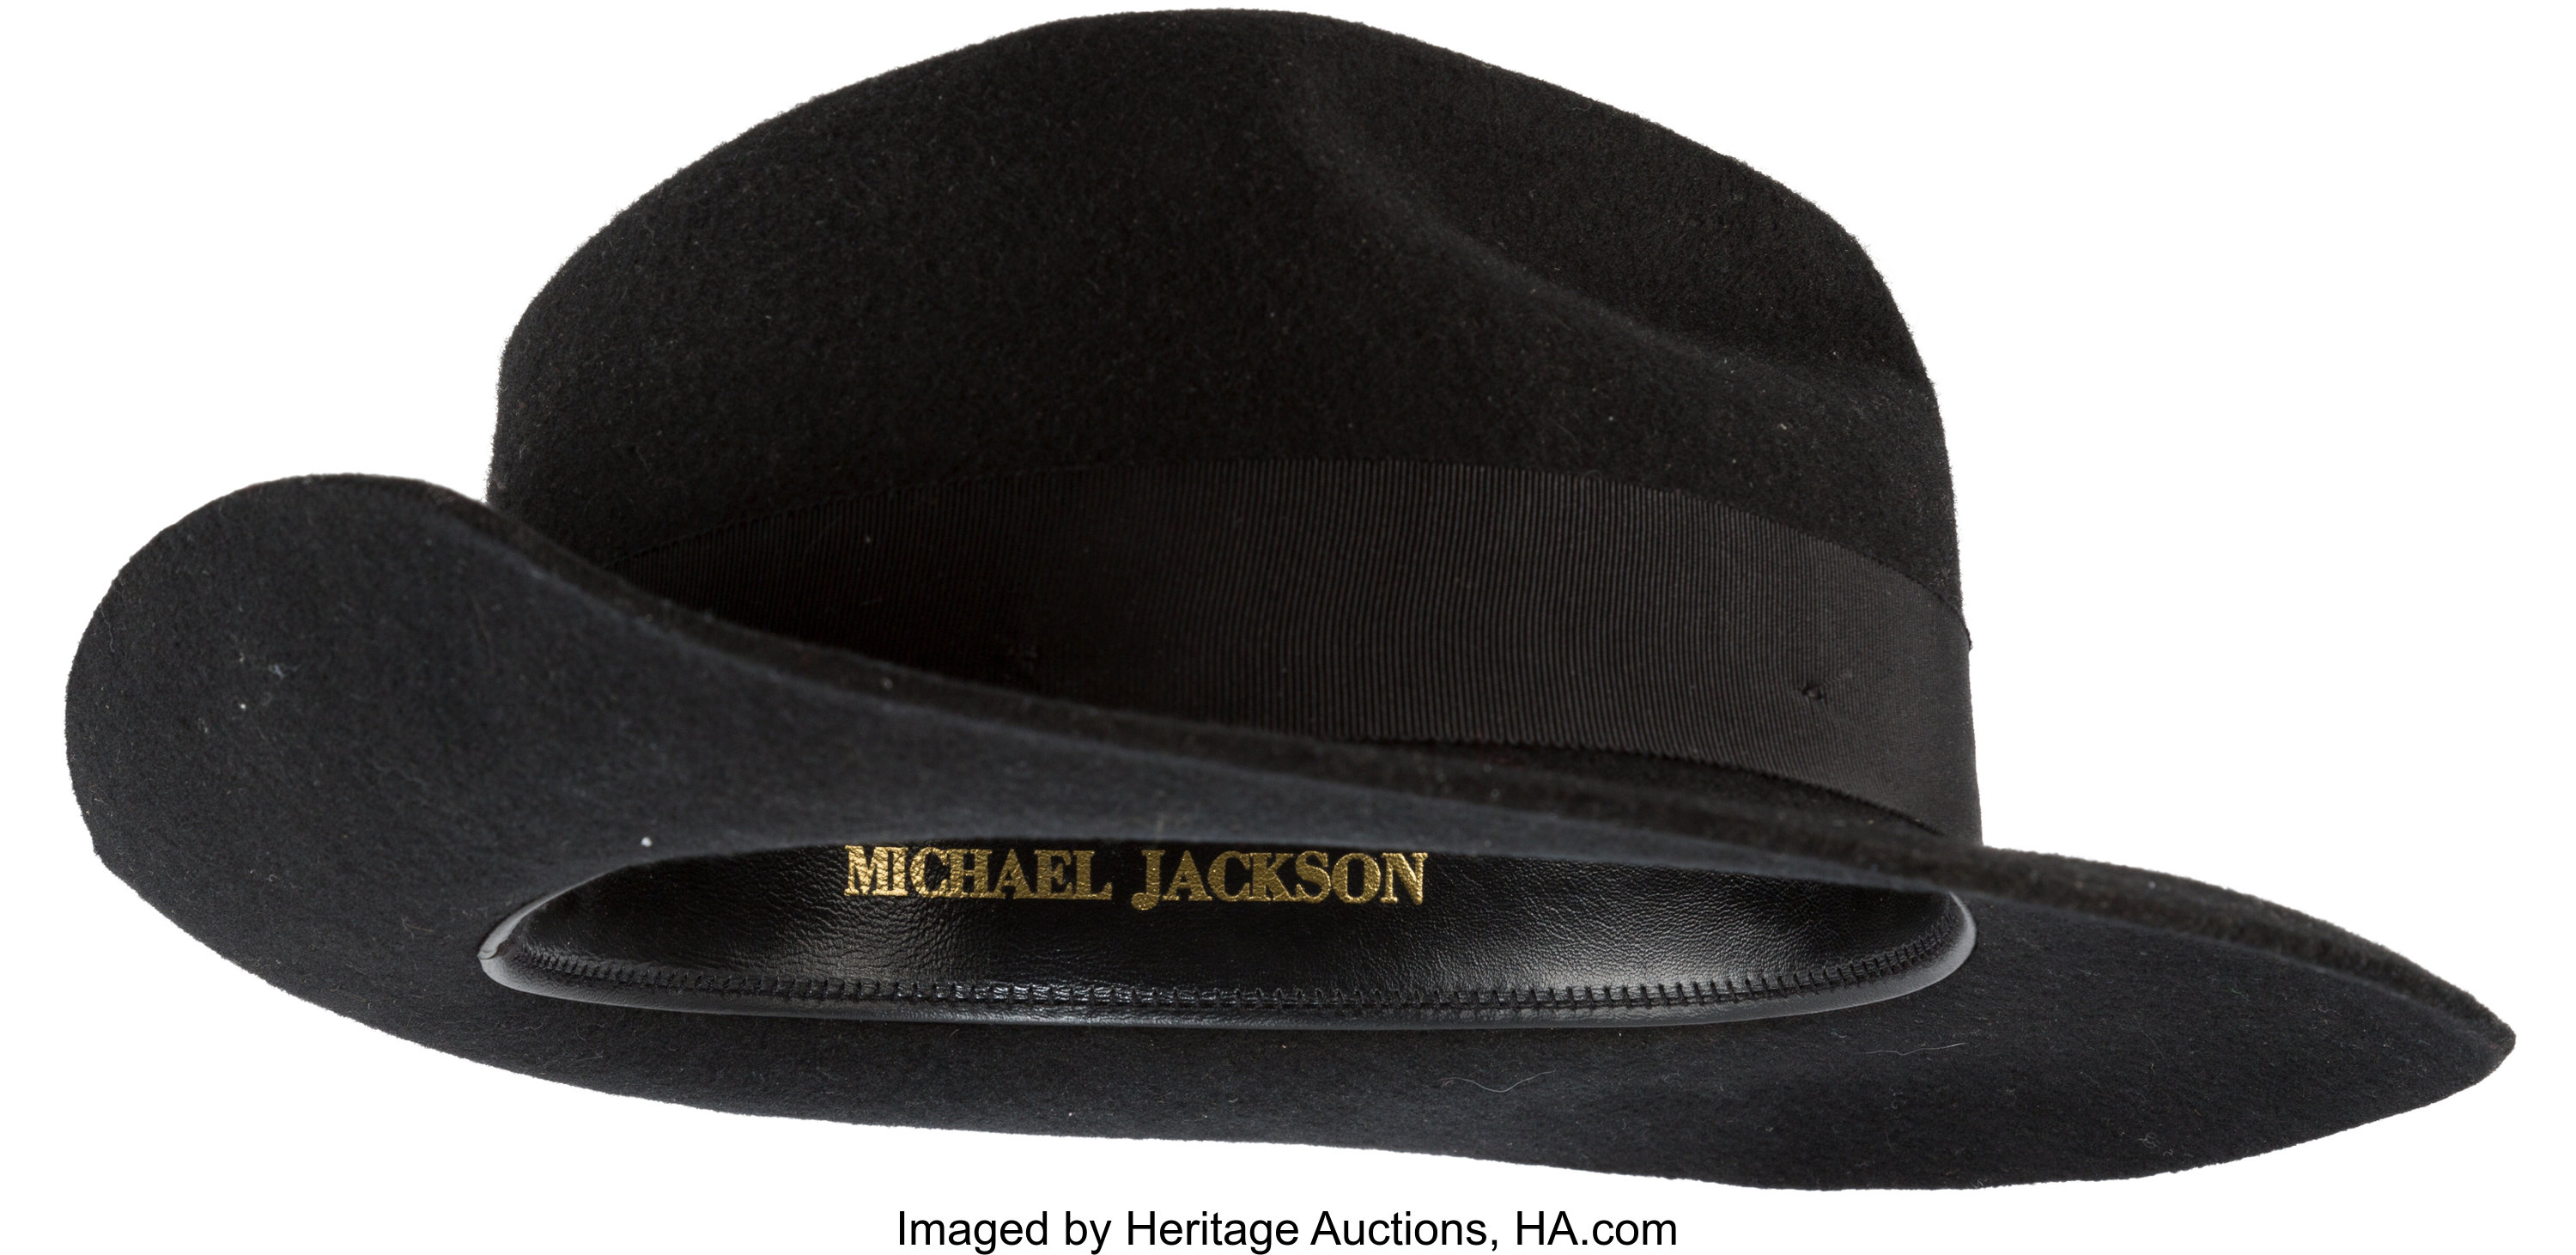 Michael Jackson Signed, Owned and Worn Black Fedora. Music